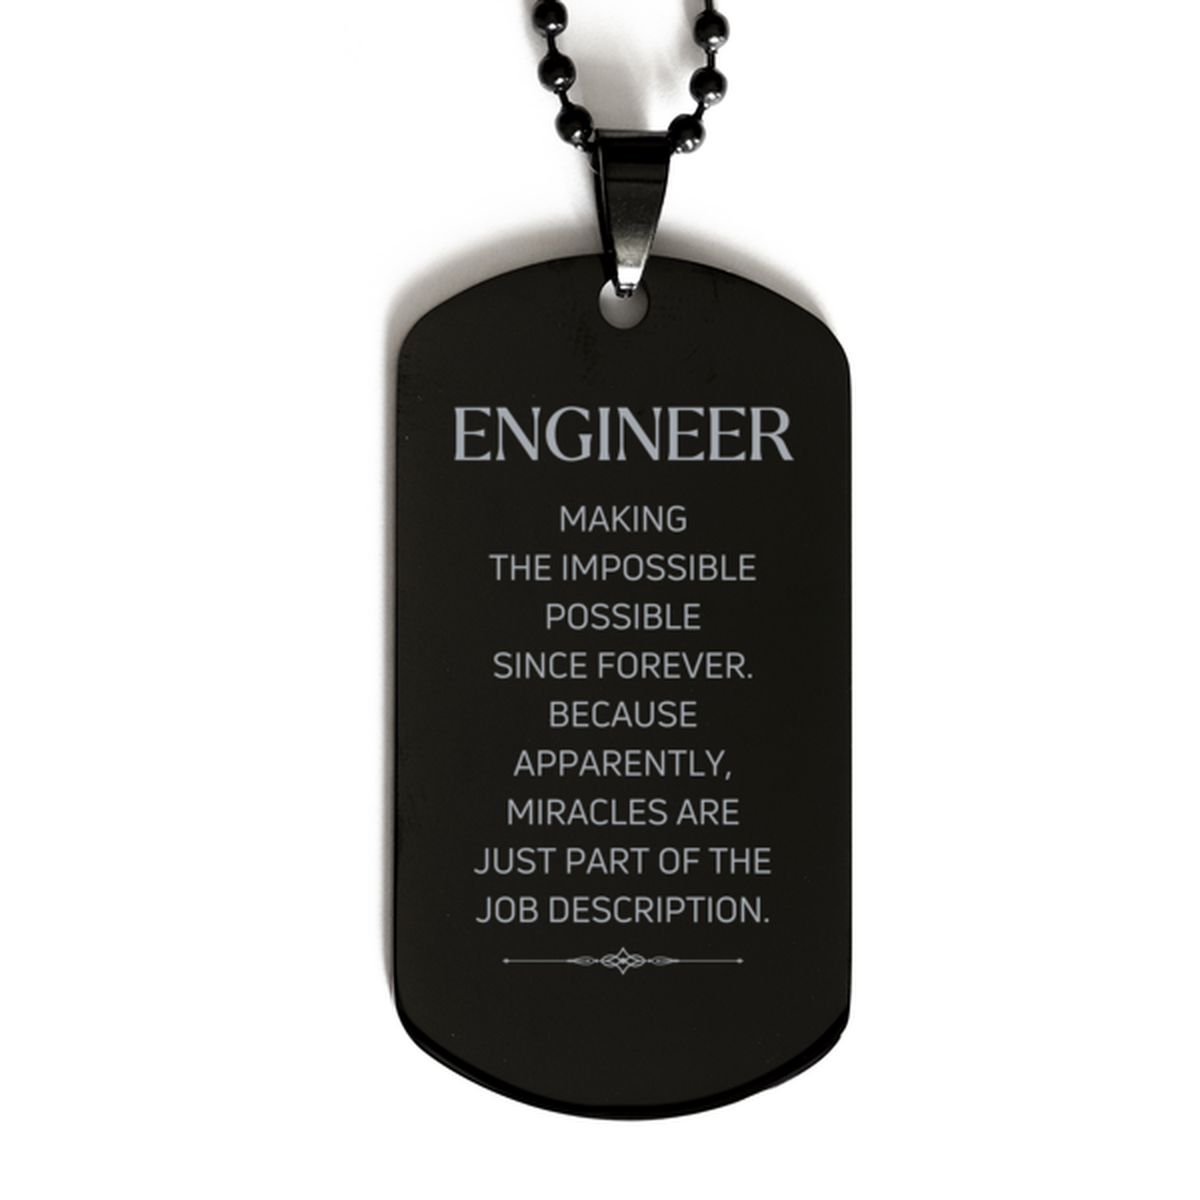 Funny Engineer Gifts, Miracles are just part of the job description, Inspirational Birthday Black Dog Tag For Engineer, Men, Women, Coworkers, Friends, Boss